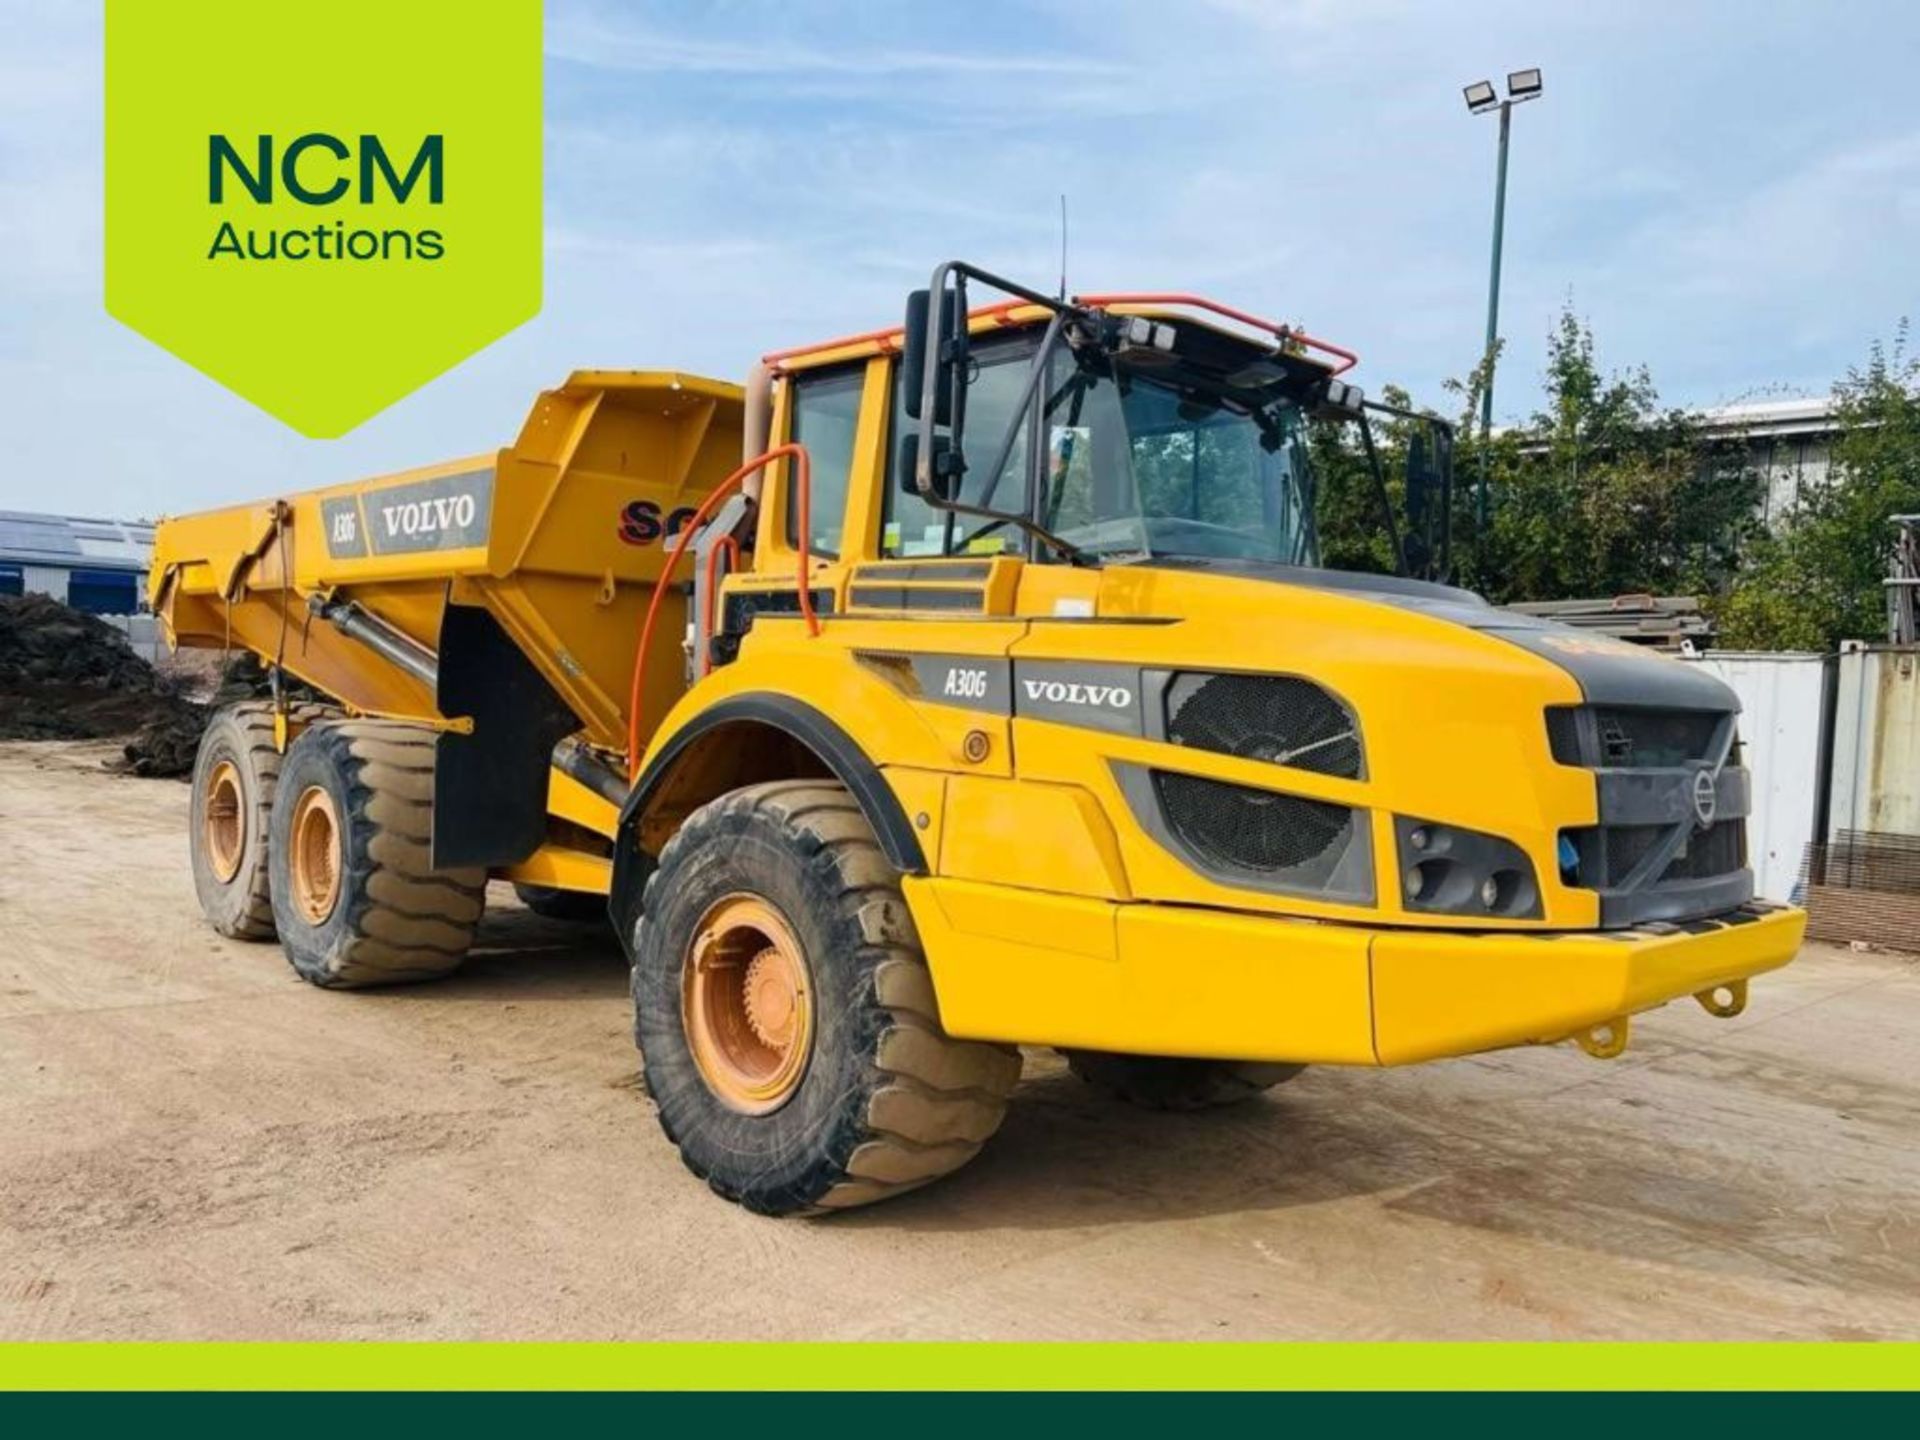 Sell your Plant, Machinery, Commercial Vehicles & Industrial Assets with NCM Auctions! - Image 2 of 2